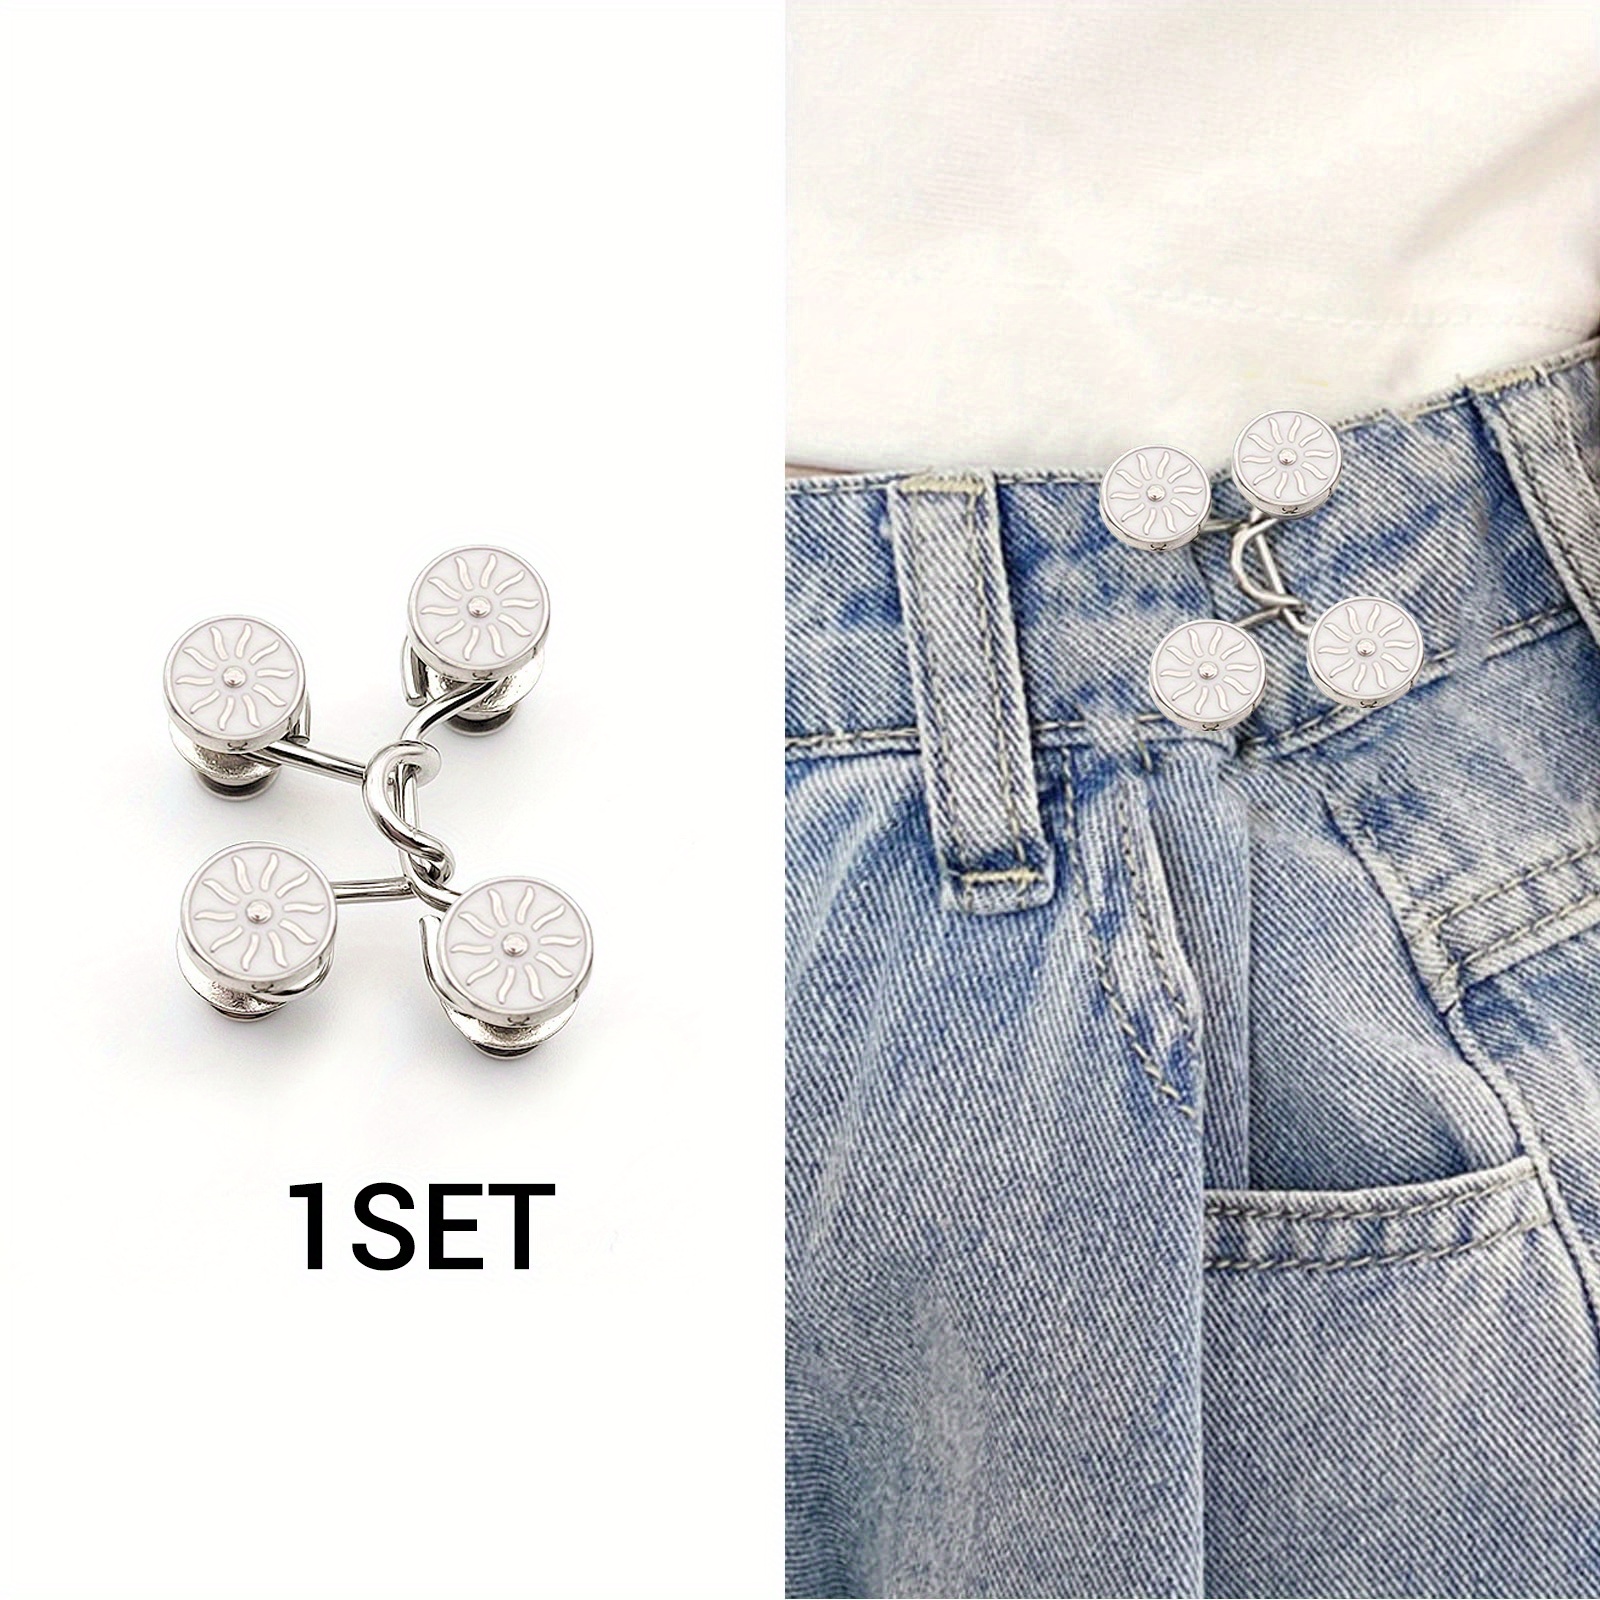 LRITER Jeans Button Pins, Detachable Jean Button for Loose Jeans No Sewing  Adjustable Buttons for Jeans Pant Clips for Waist Tightener (Black Pearl